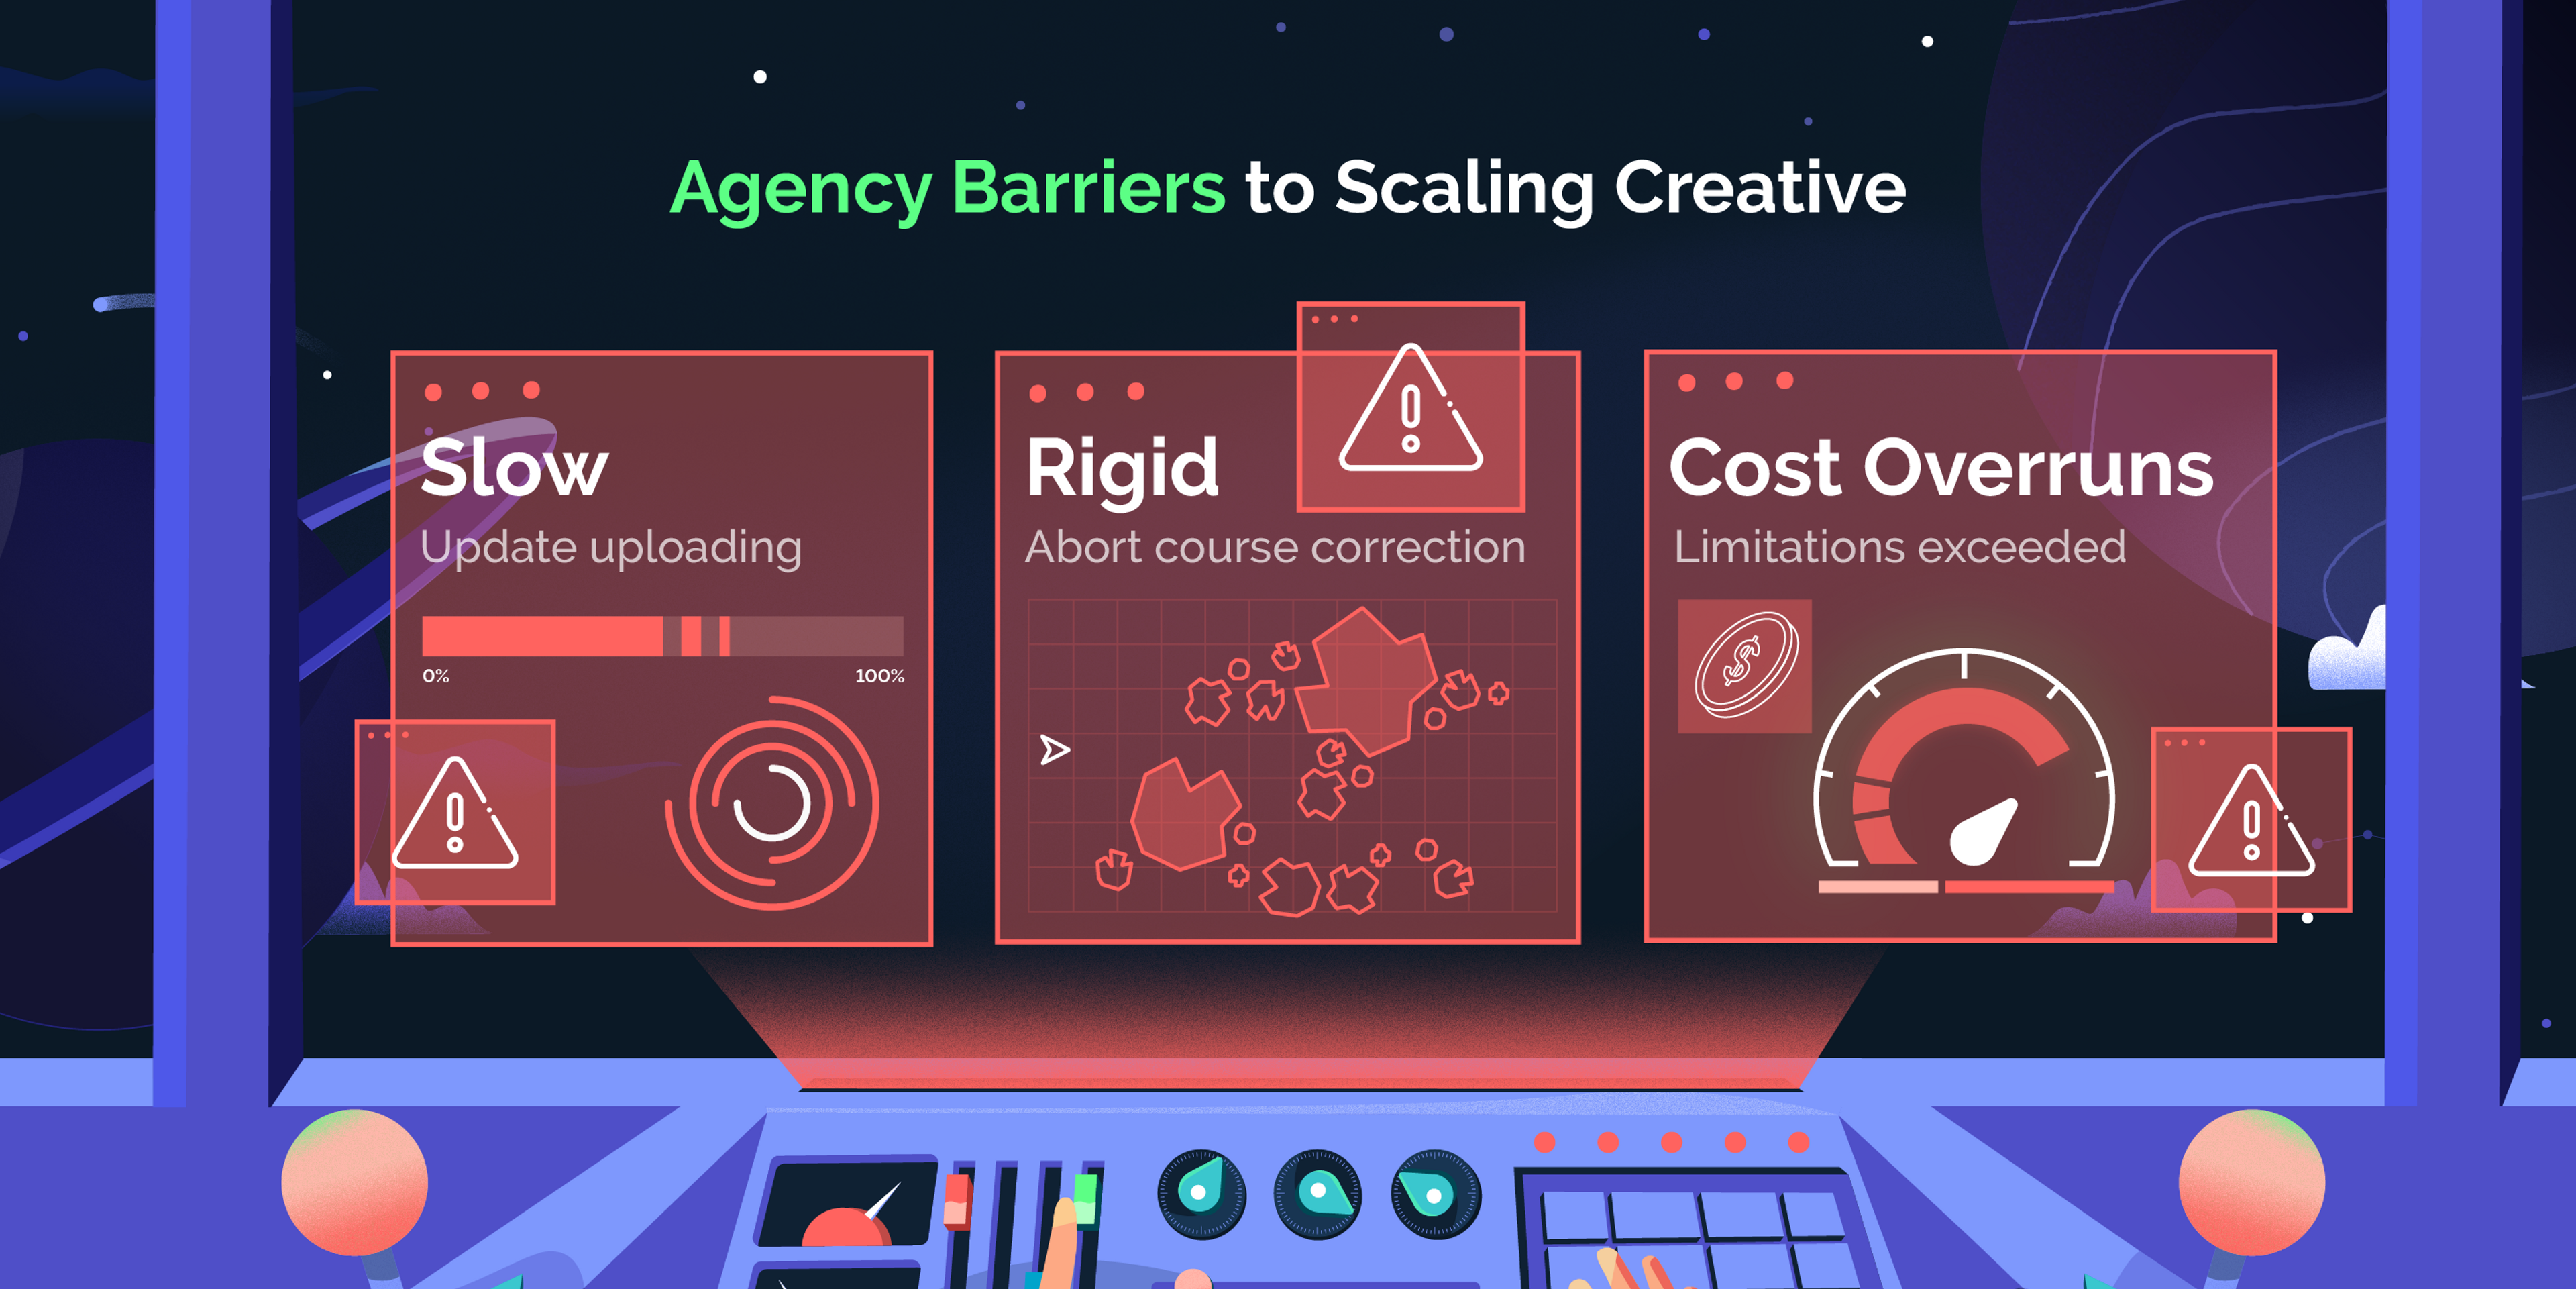 An infographic that shows 3 main reasons why creative agencies are barriers to scaling graphic design. They're slow, rigid and they have inflexible pricing models. 